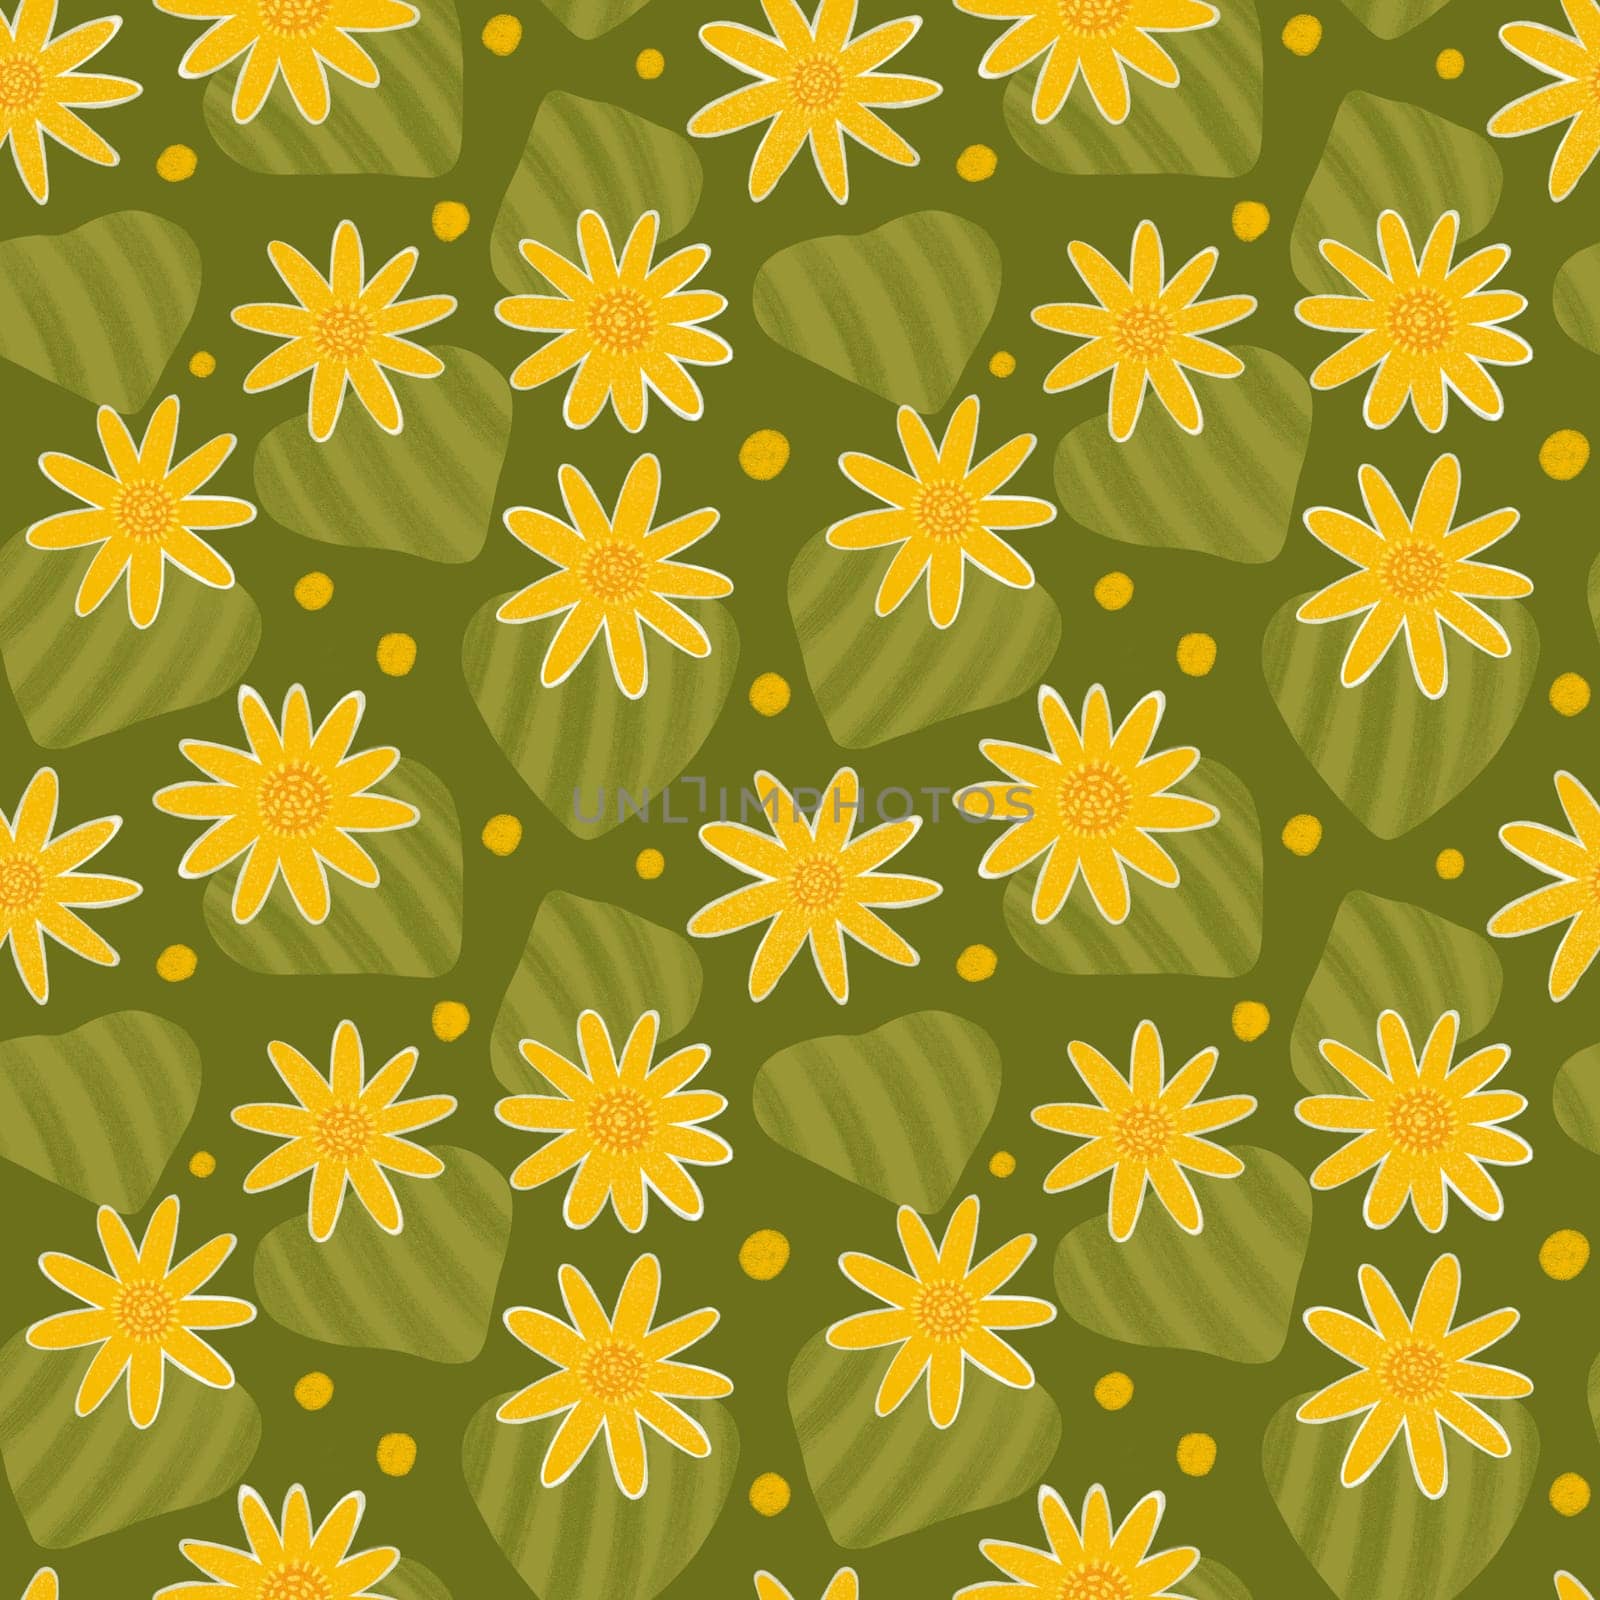 Floral seamless pattern. Yellow flowers with leaves on green background. Cute hand drawn water lilies with brush texture. Summer floral repeated design for textile, fabrics, wallpaper